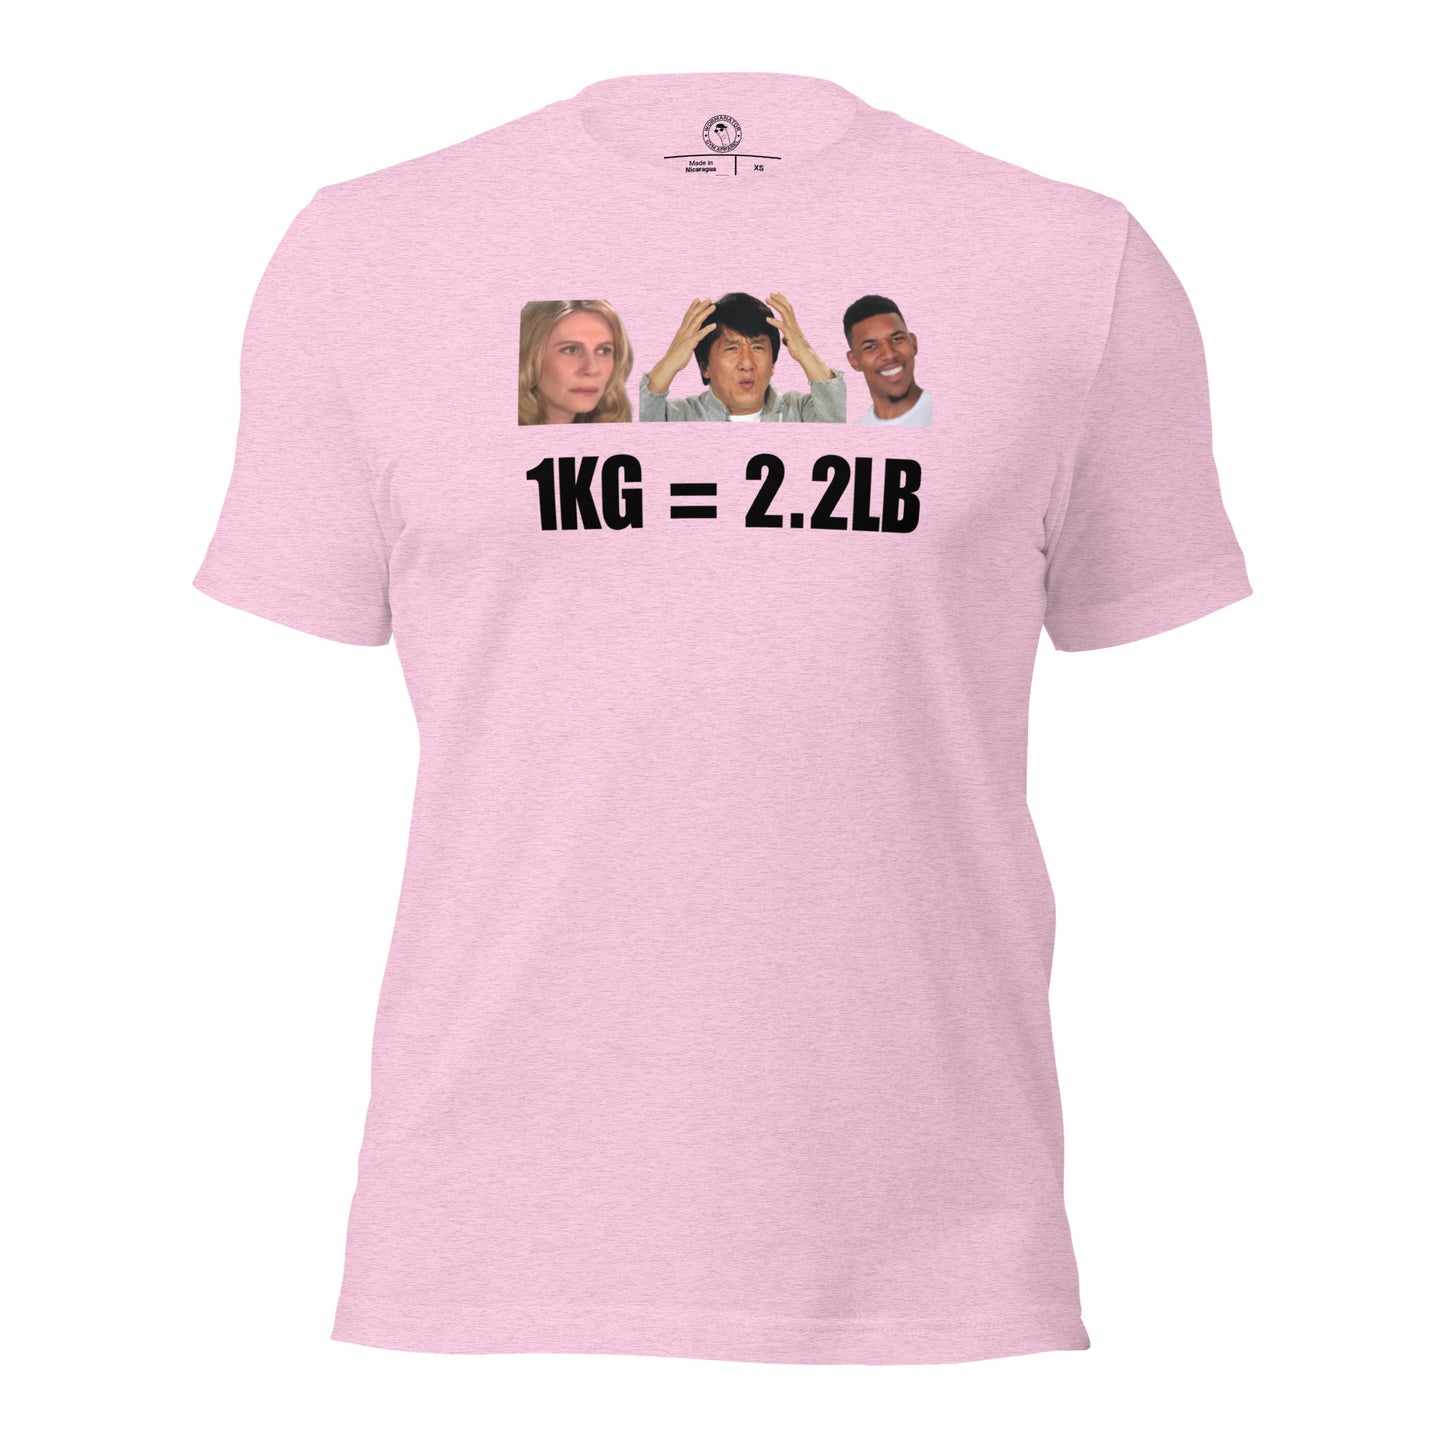 1kg = 2.2lb Powerlifting Conversion Shirt in Heather Prism Lilac